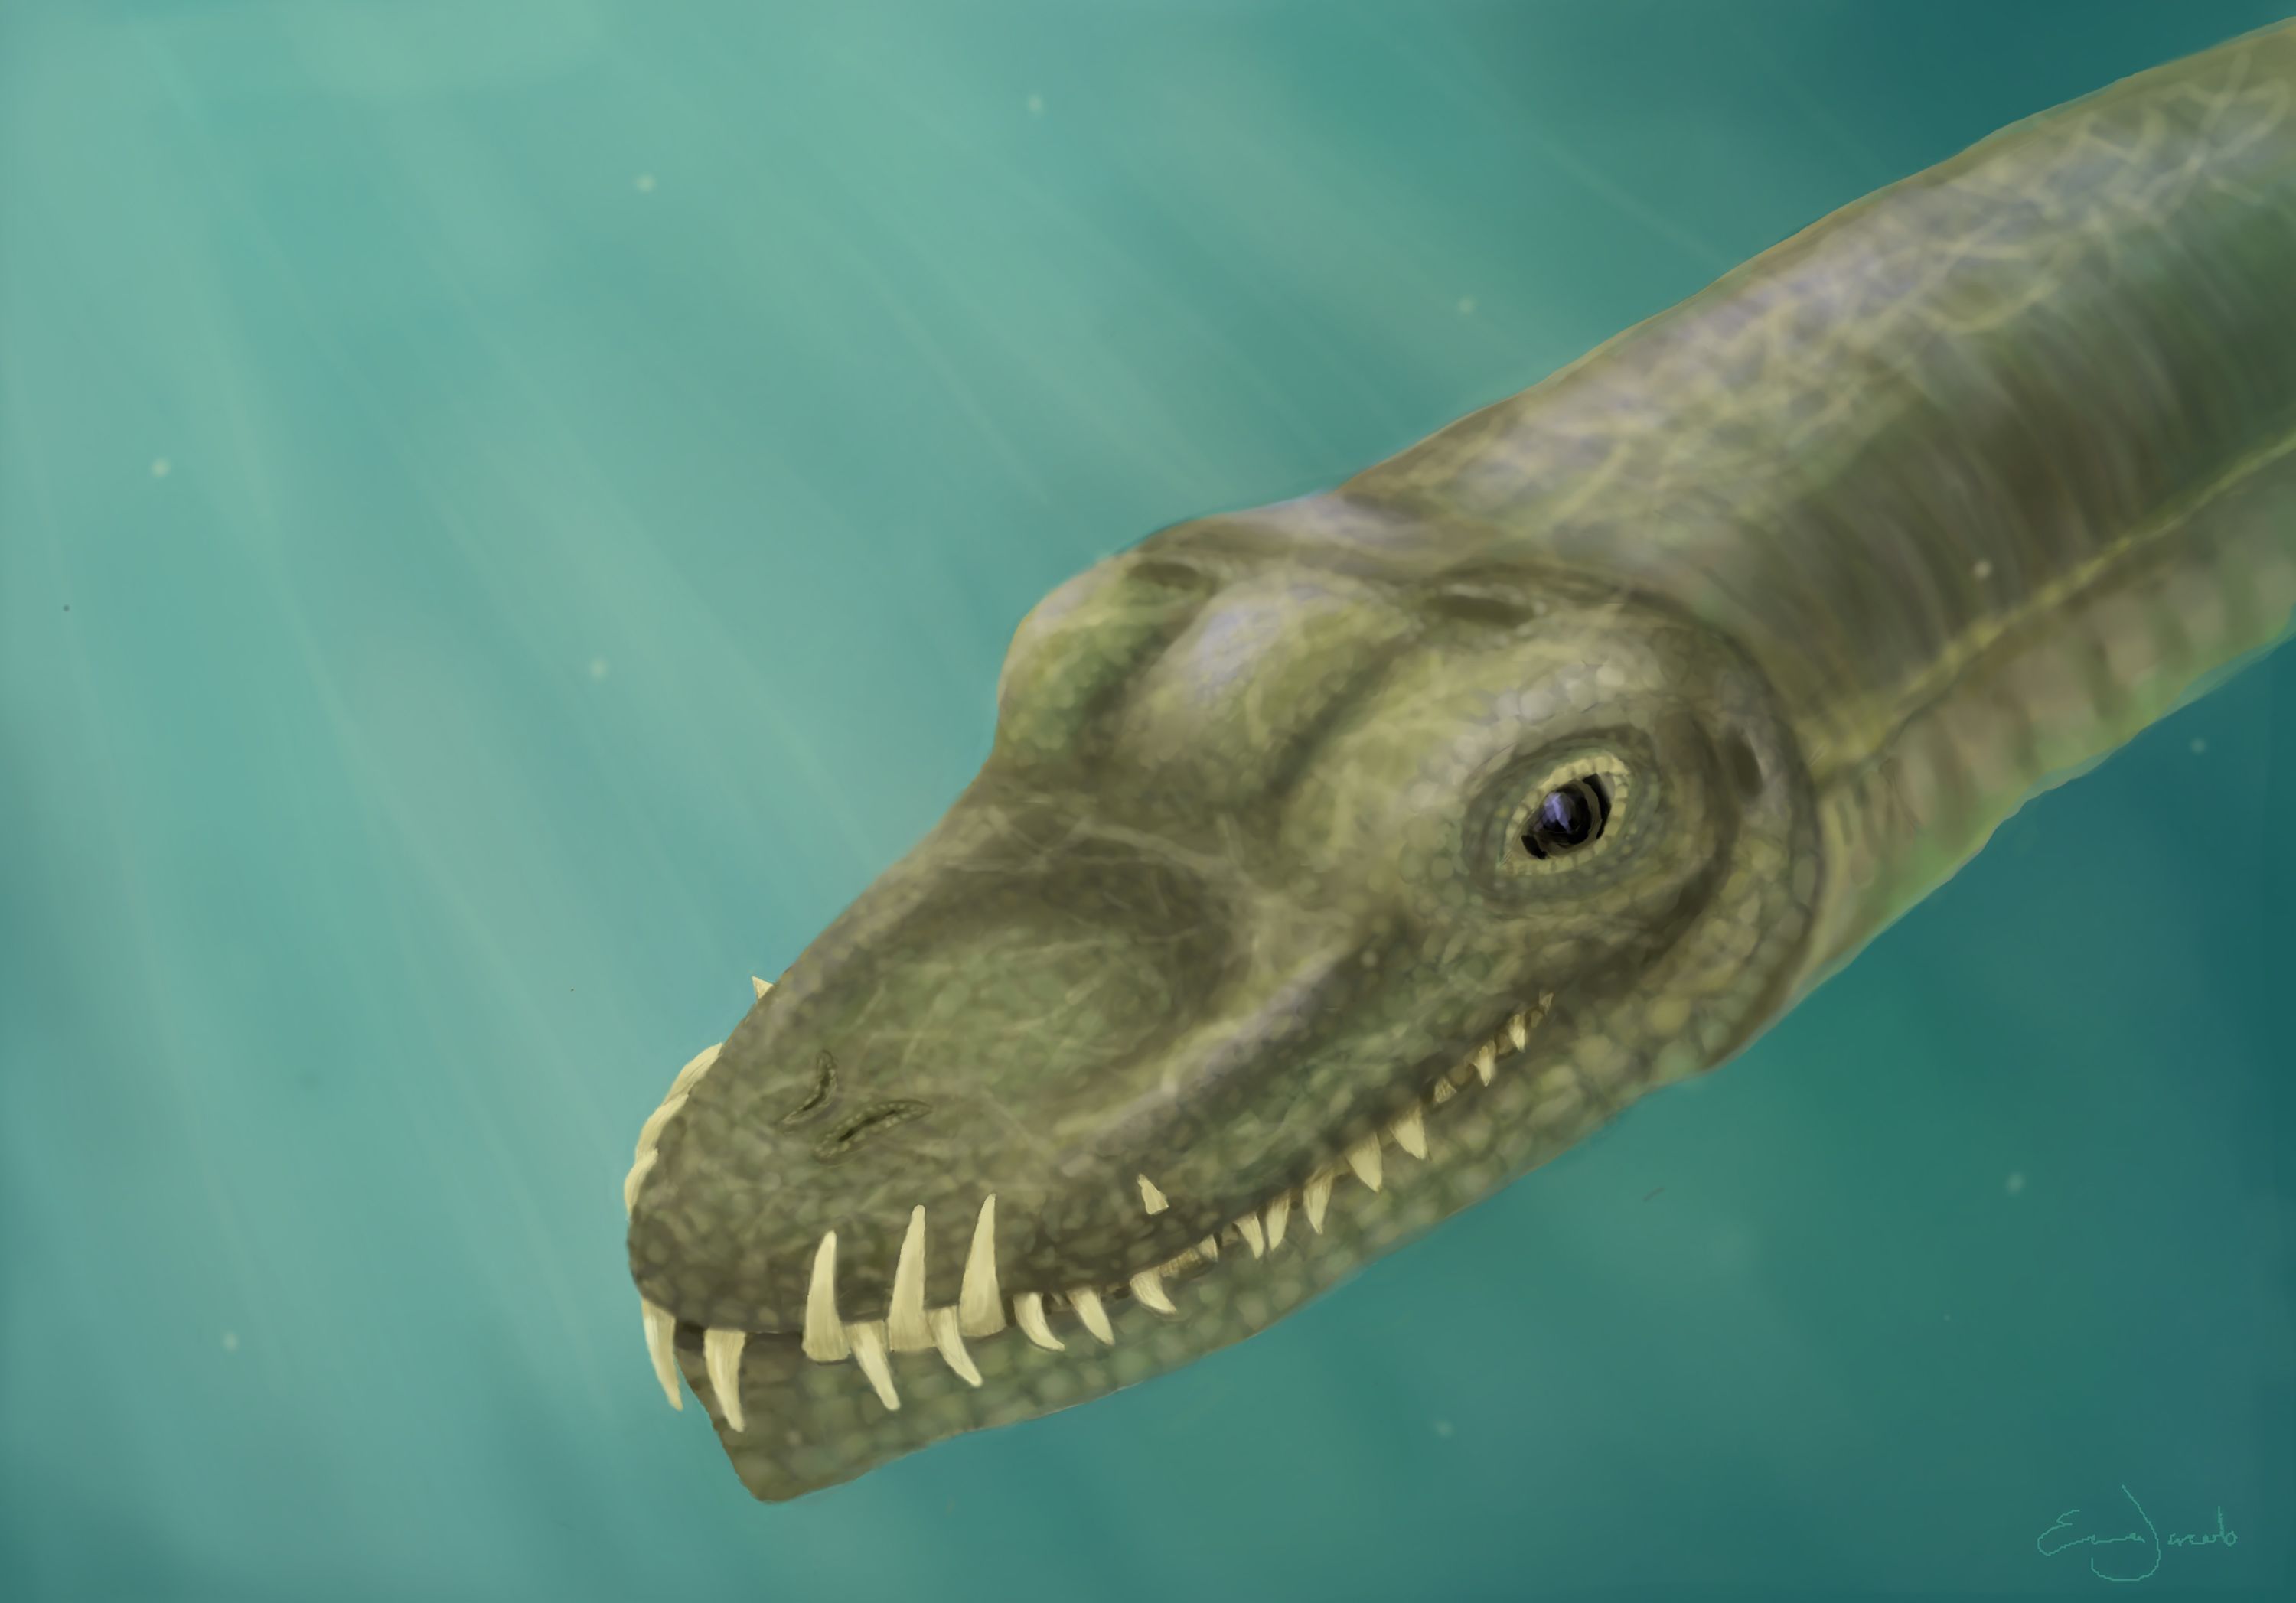 Scientists have unraveled the riddle of a real-life sea monster | CNN